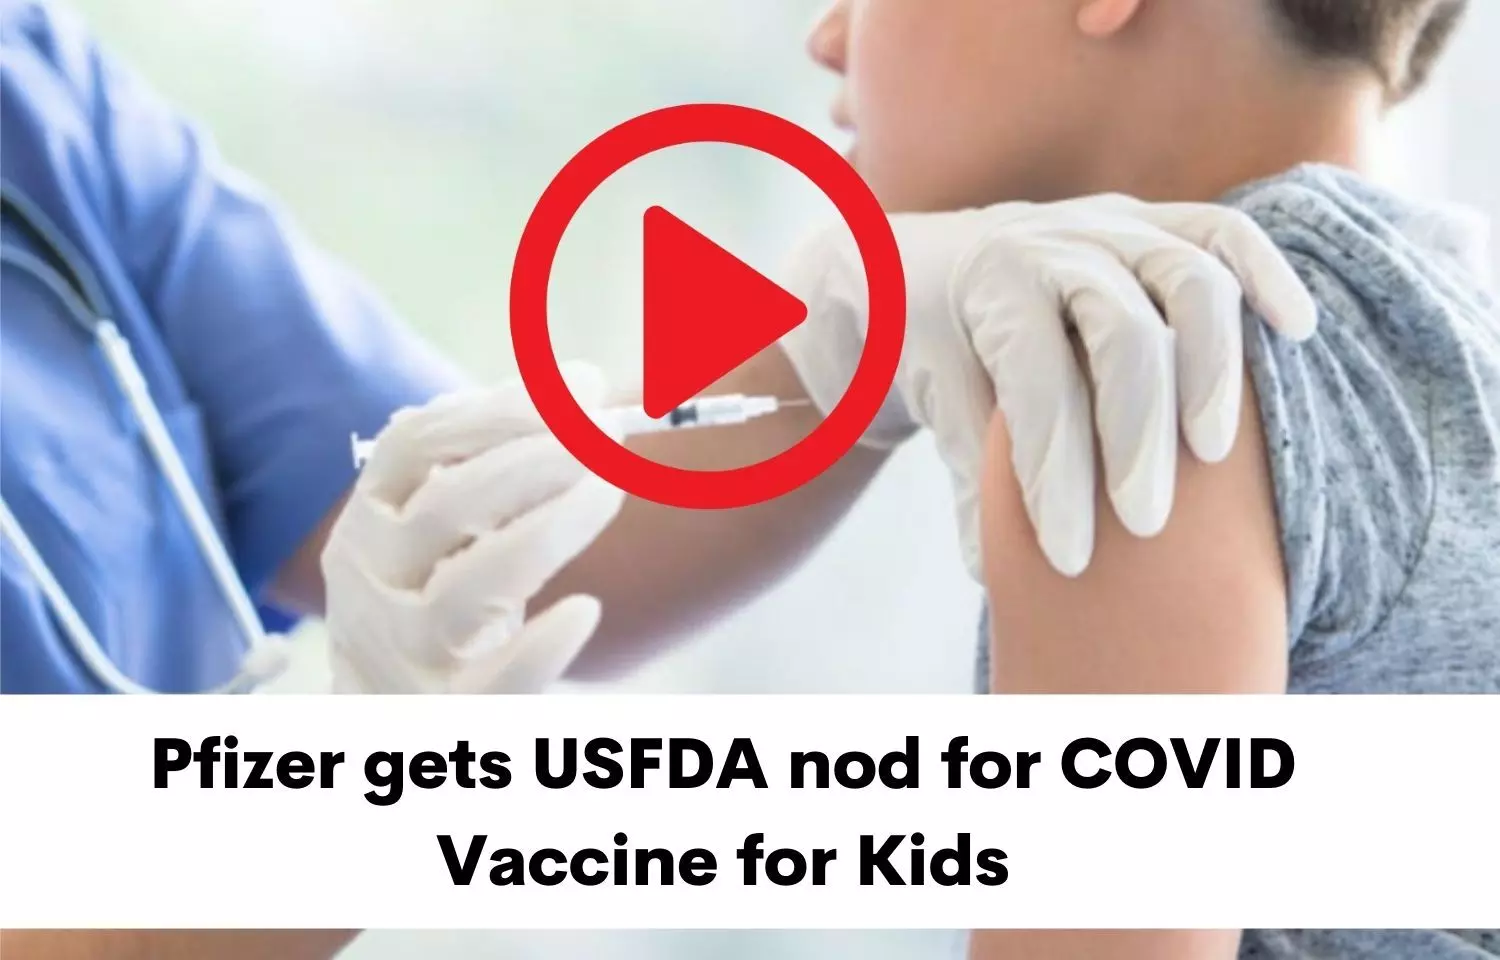 Pfizer gets USFDA nod for COVID vaccine for kids